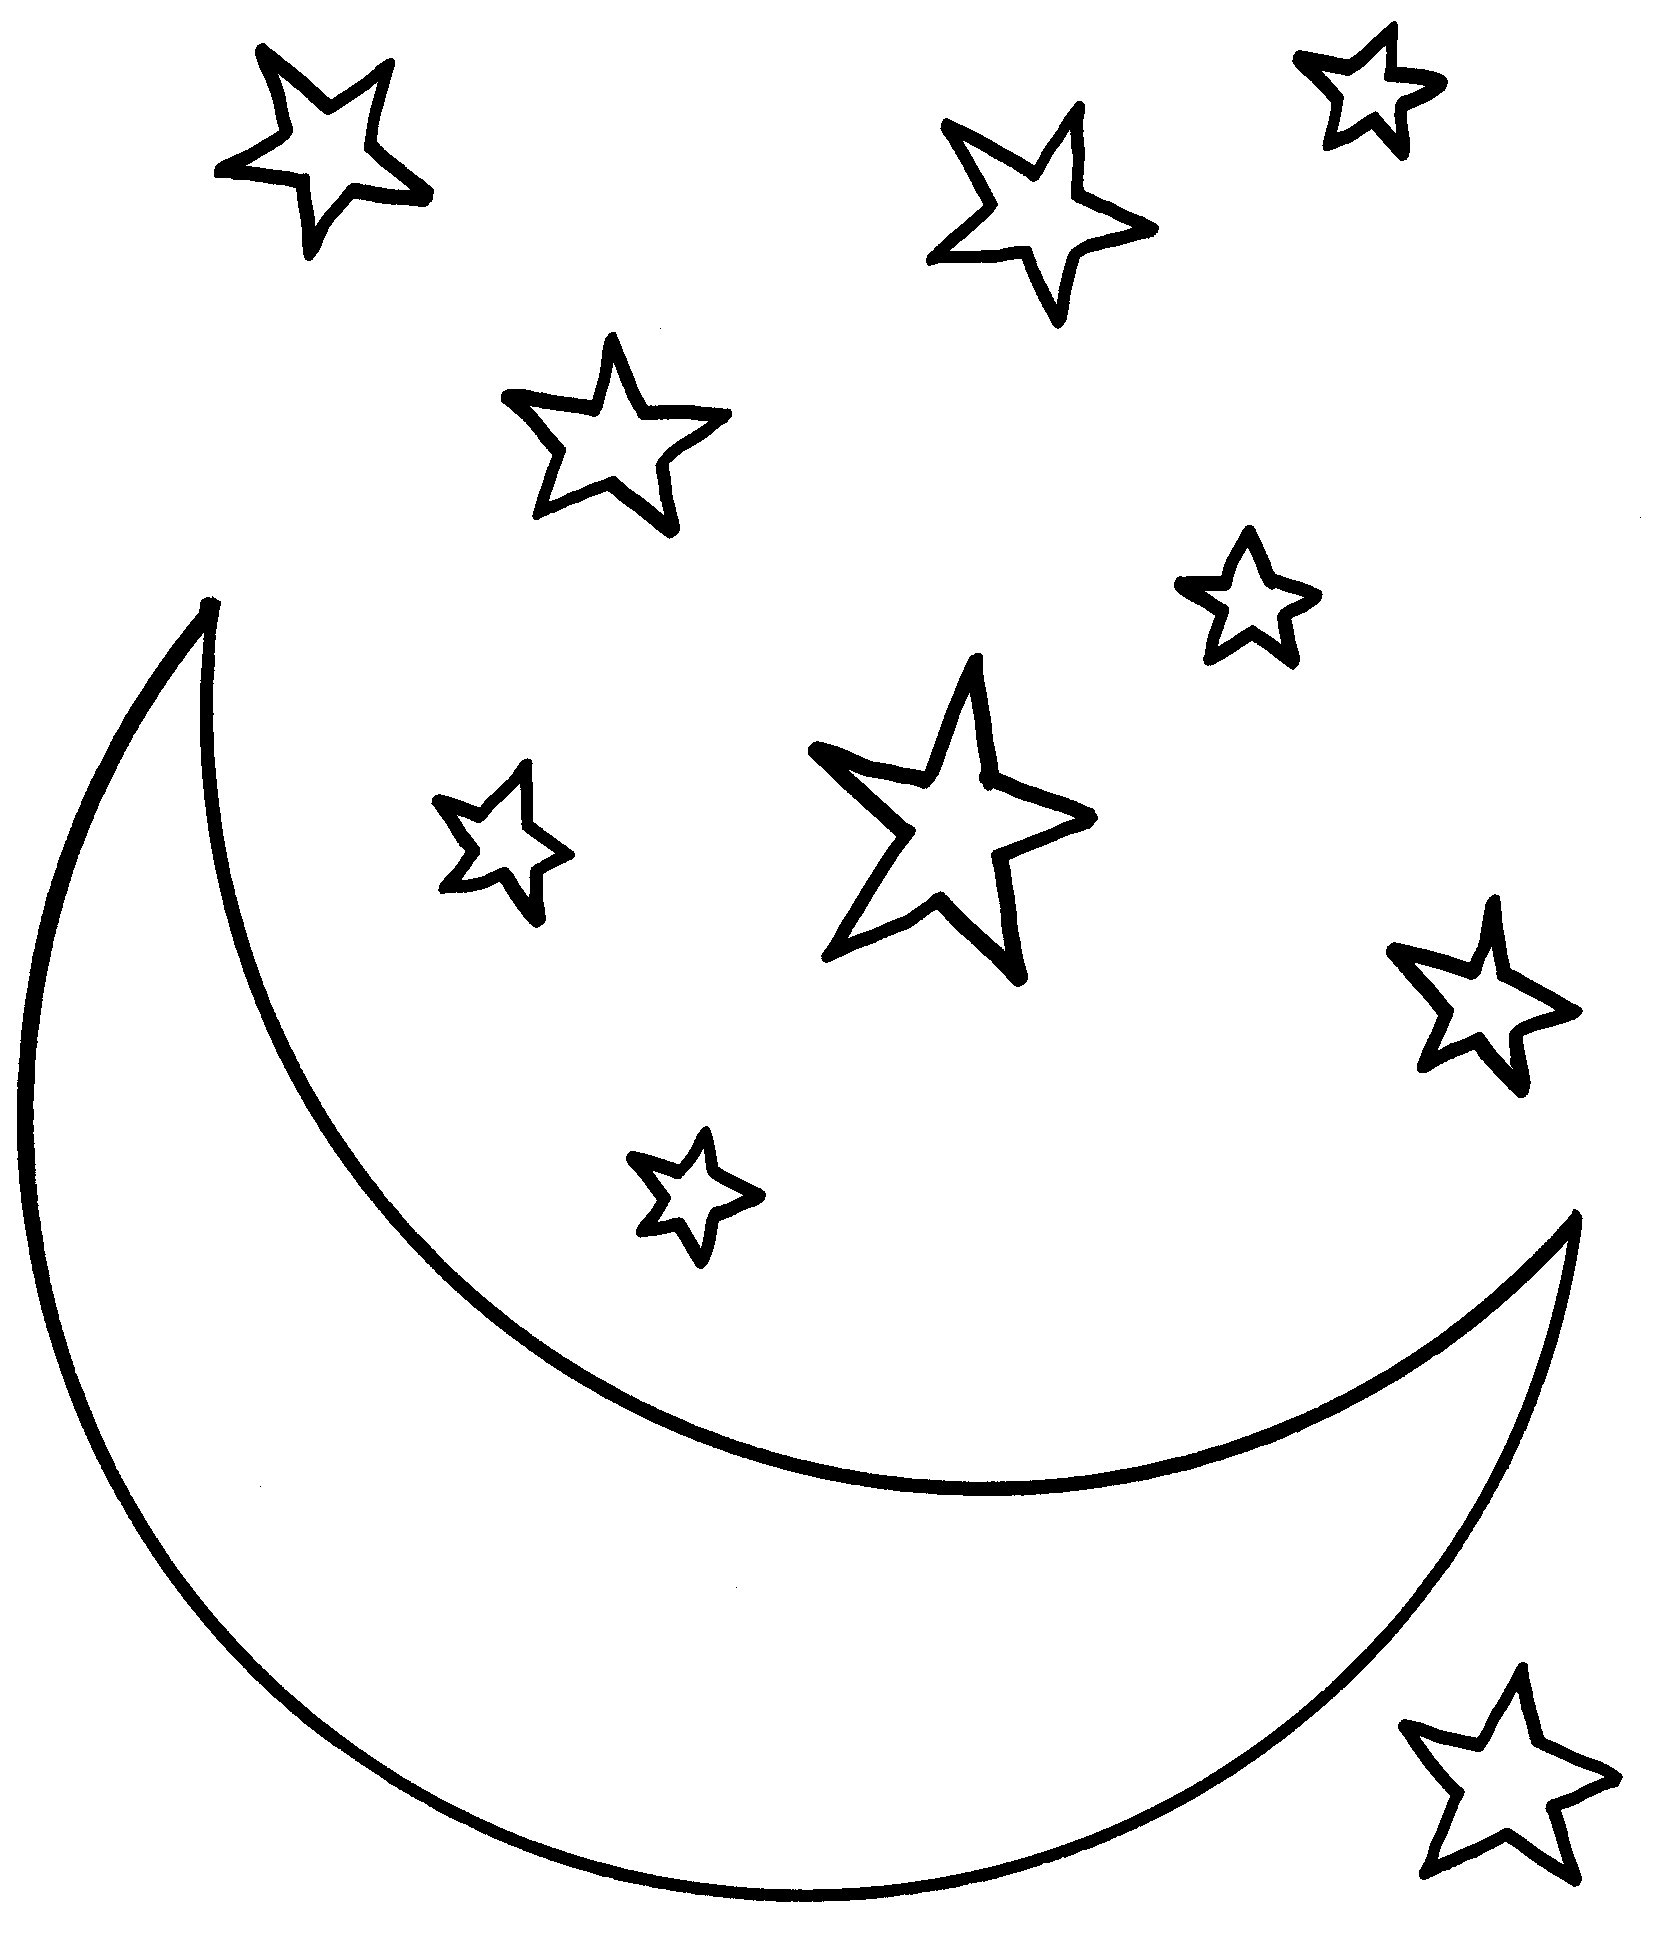 Free Moon Clipart Black And White, Download Free Clip Art.